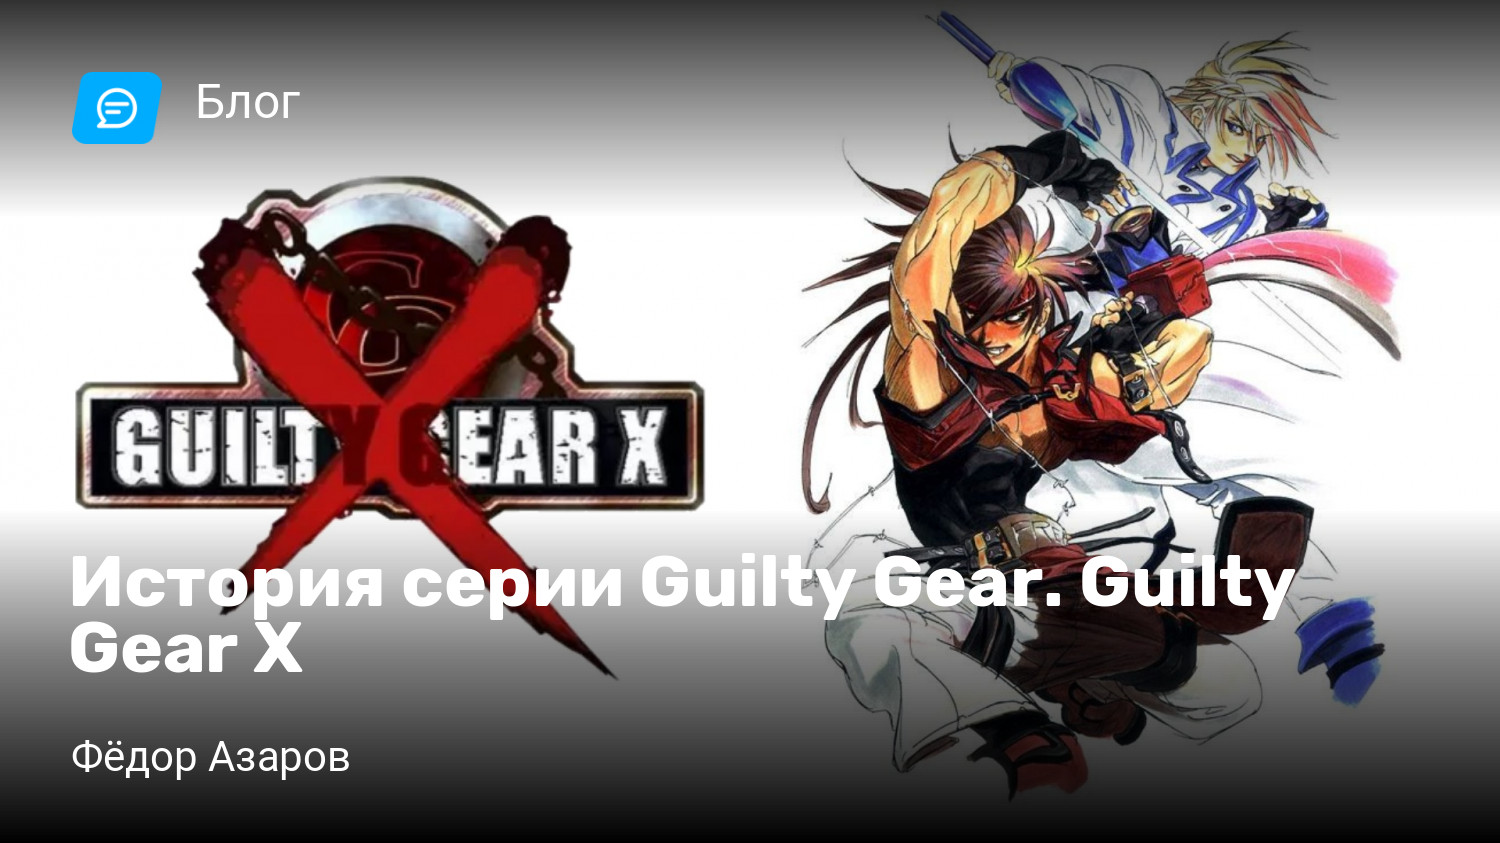 Guilty gear accent core plus r steam фото 113